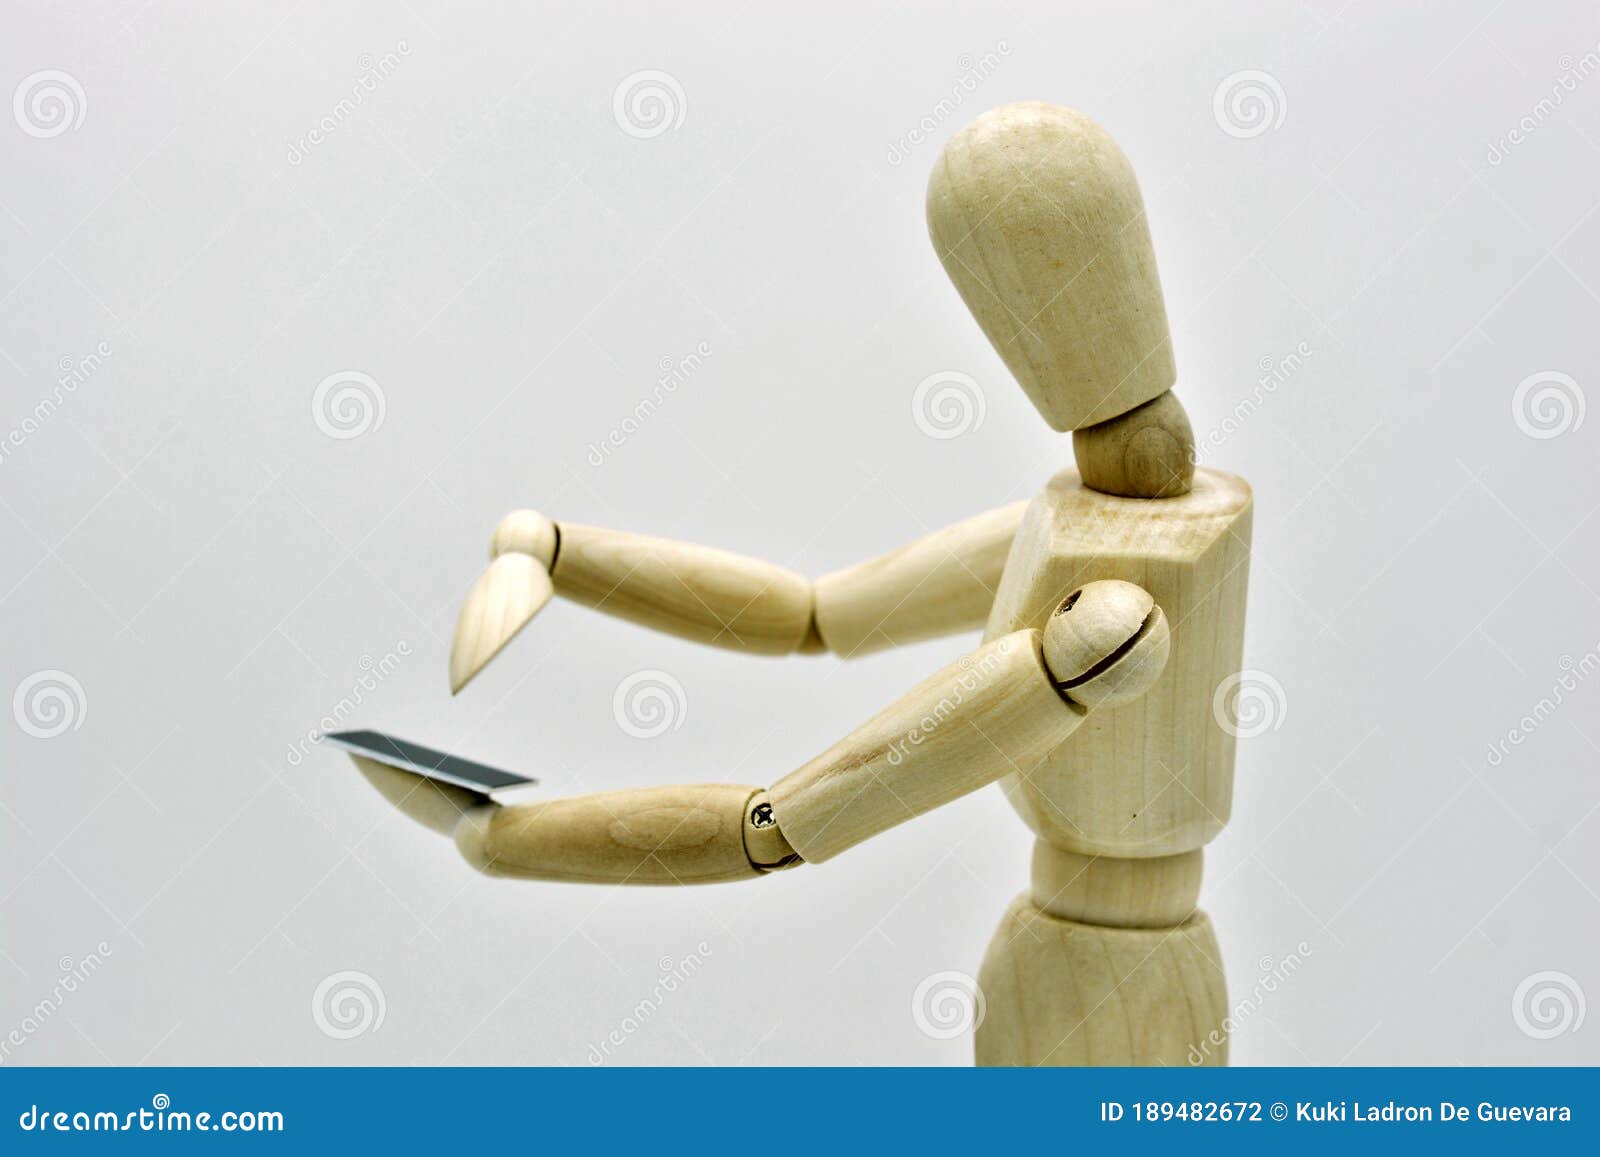 wooden mannequin with a mobile in hand